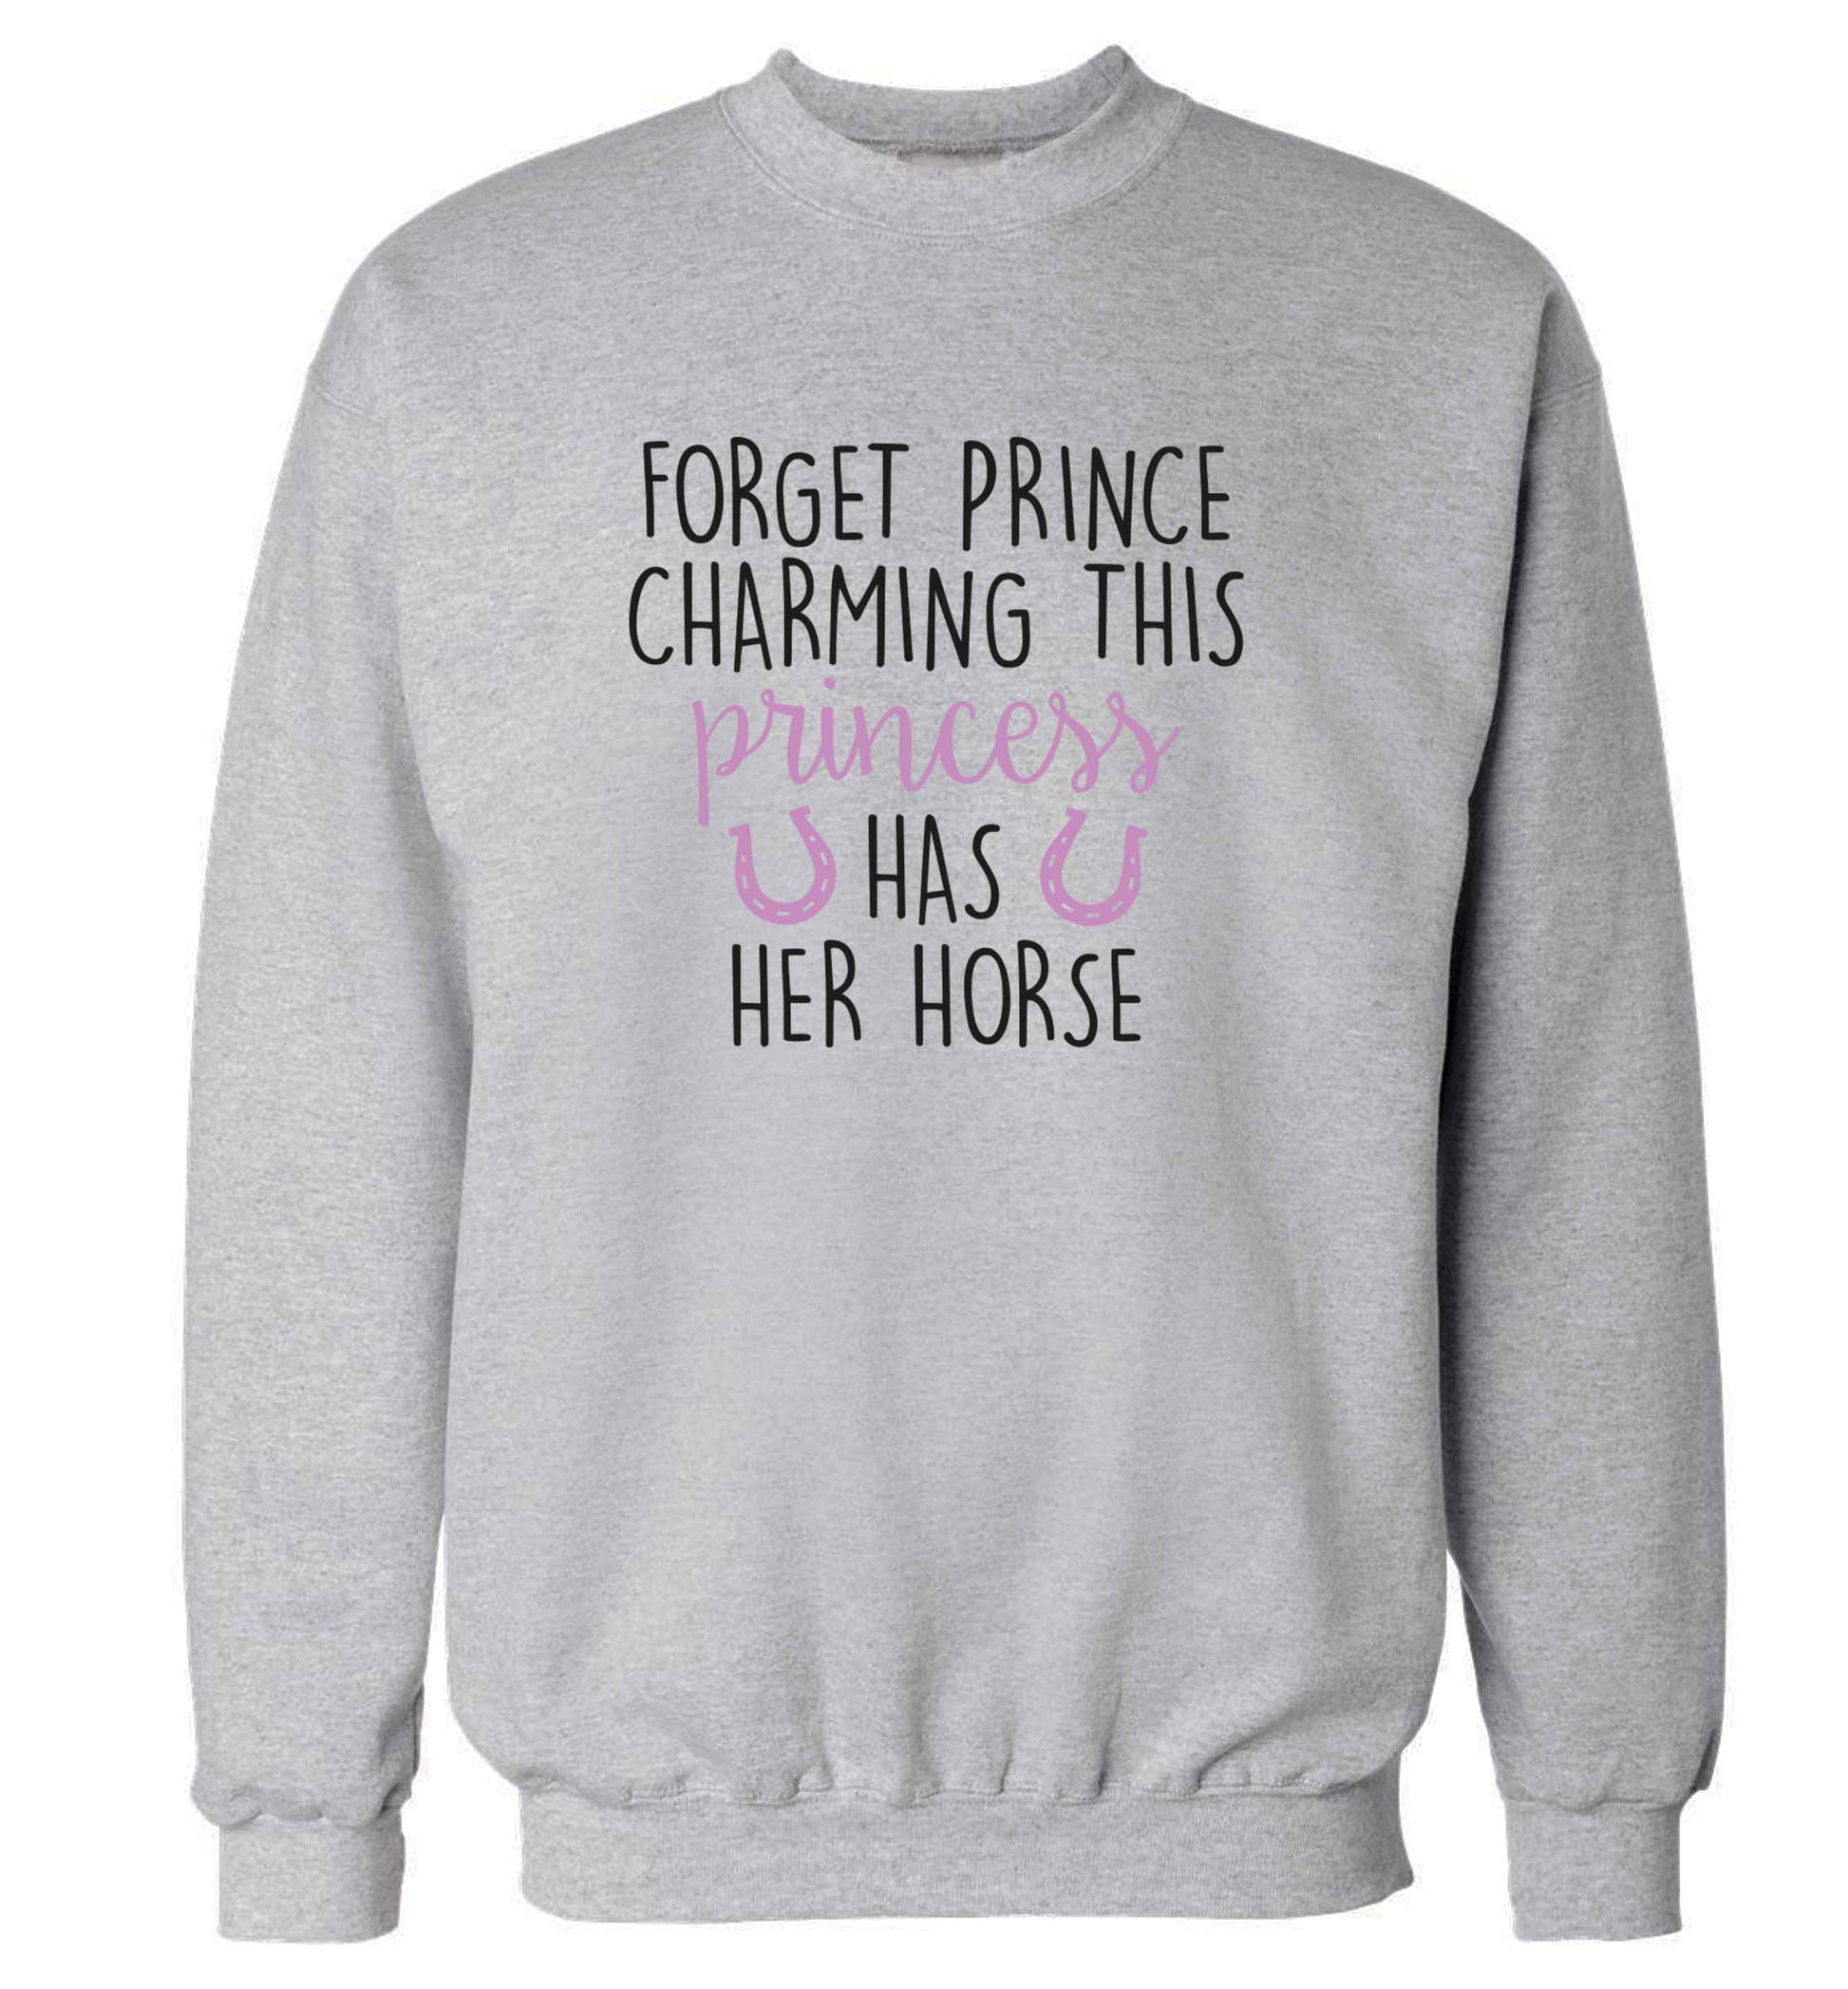 Forget prince charming this princess has her horse adult's unisex grey sweater 2XL